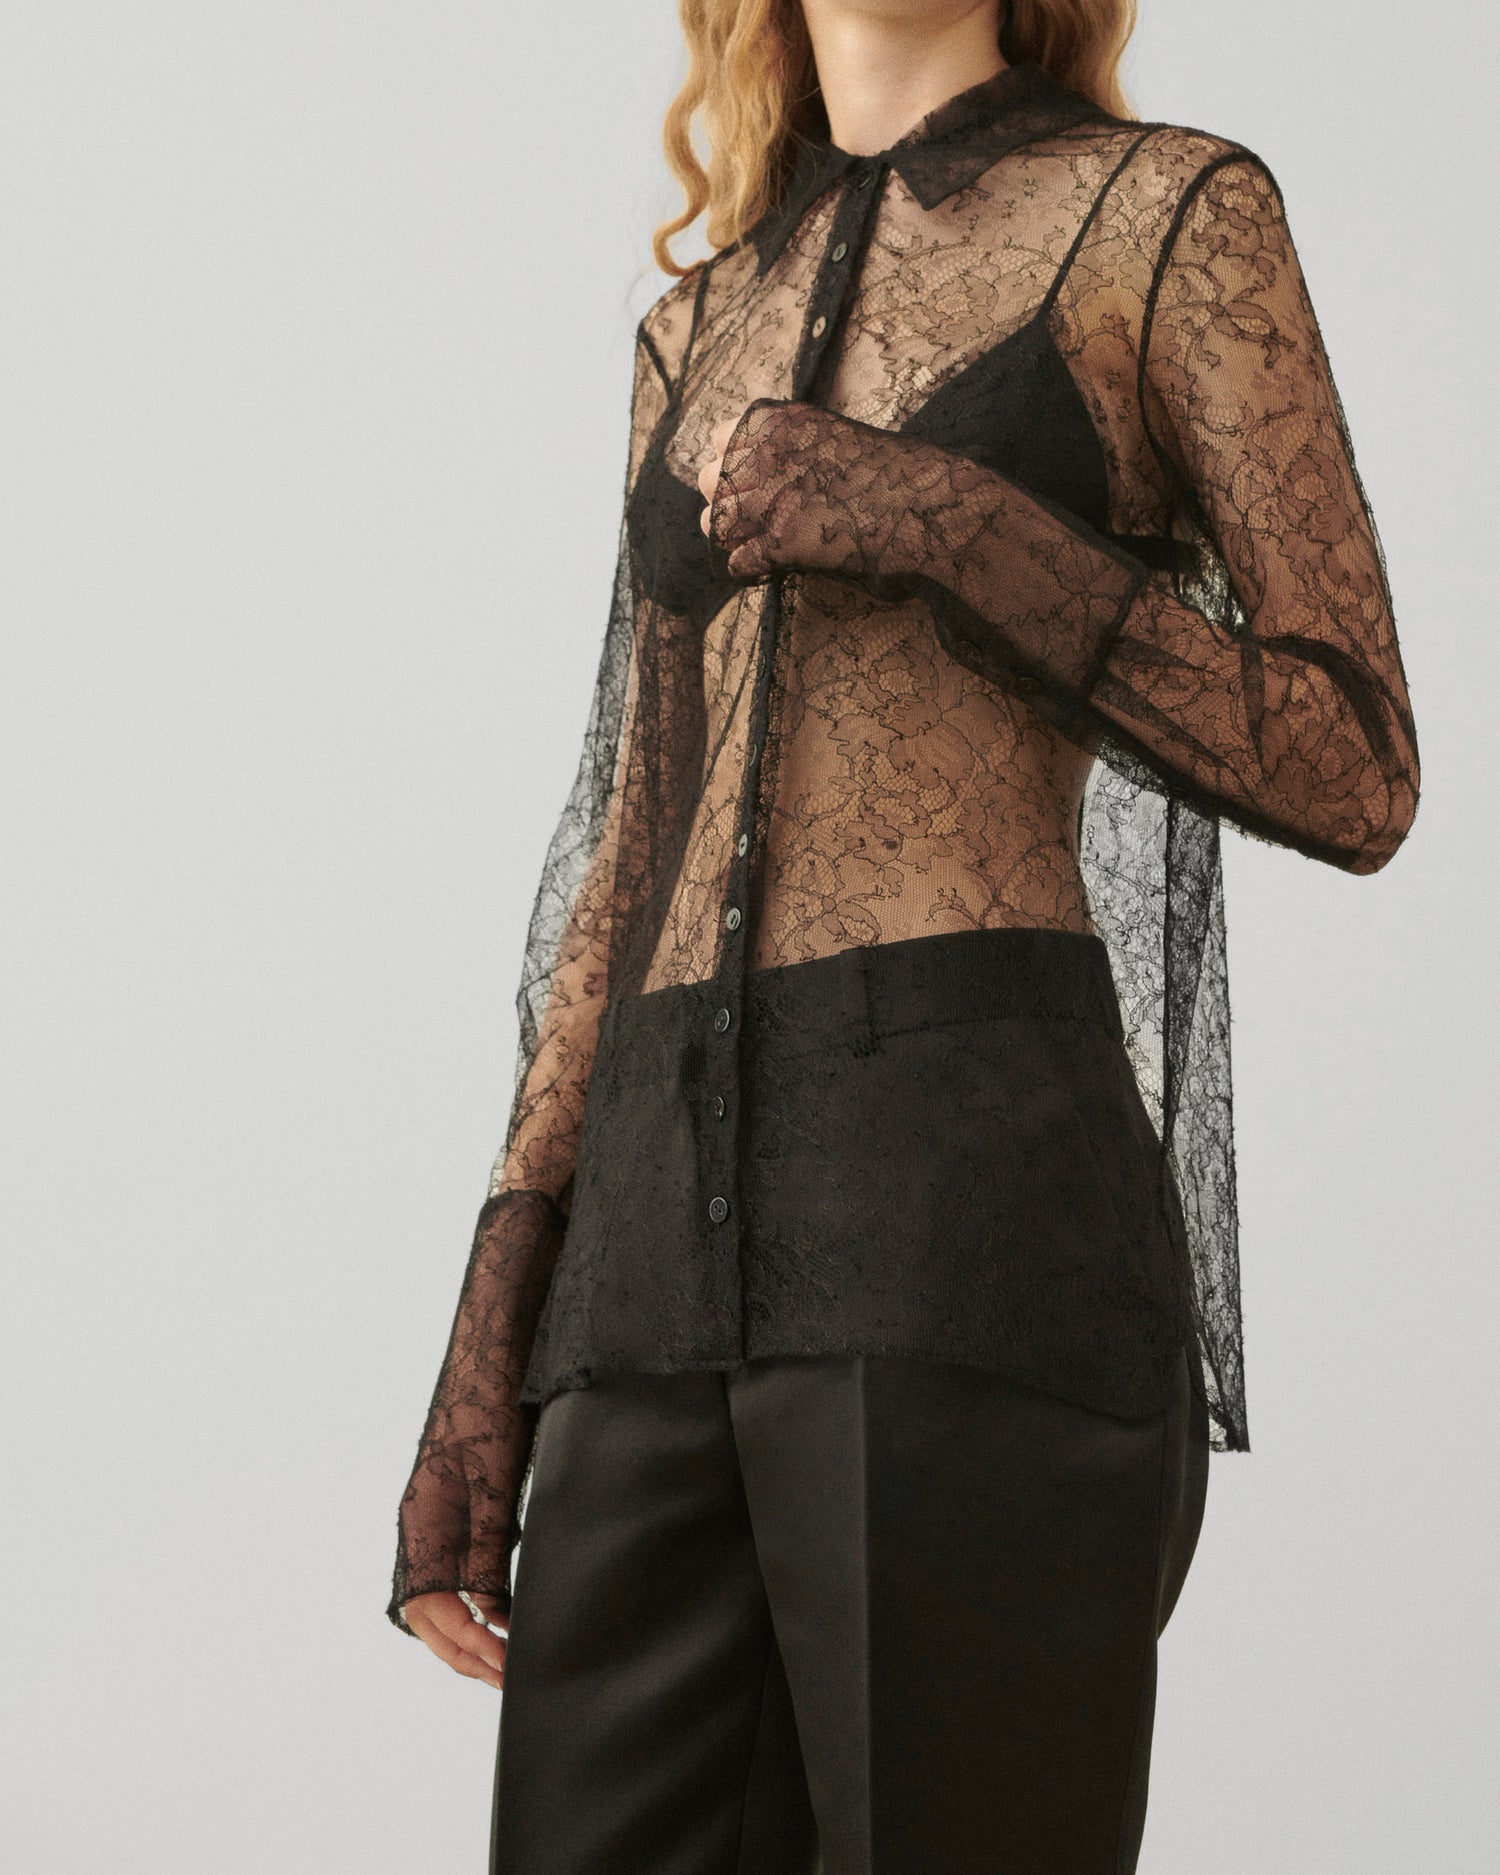 Livia Shirt in Lace, Black